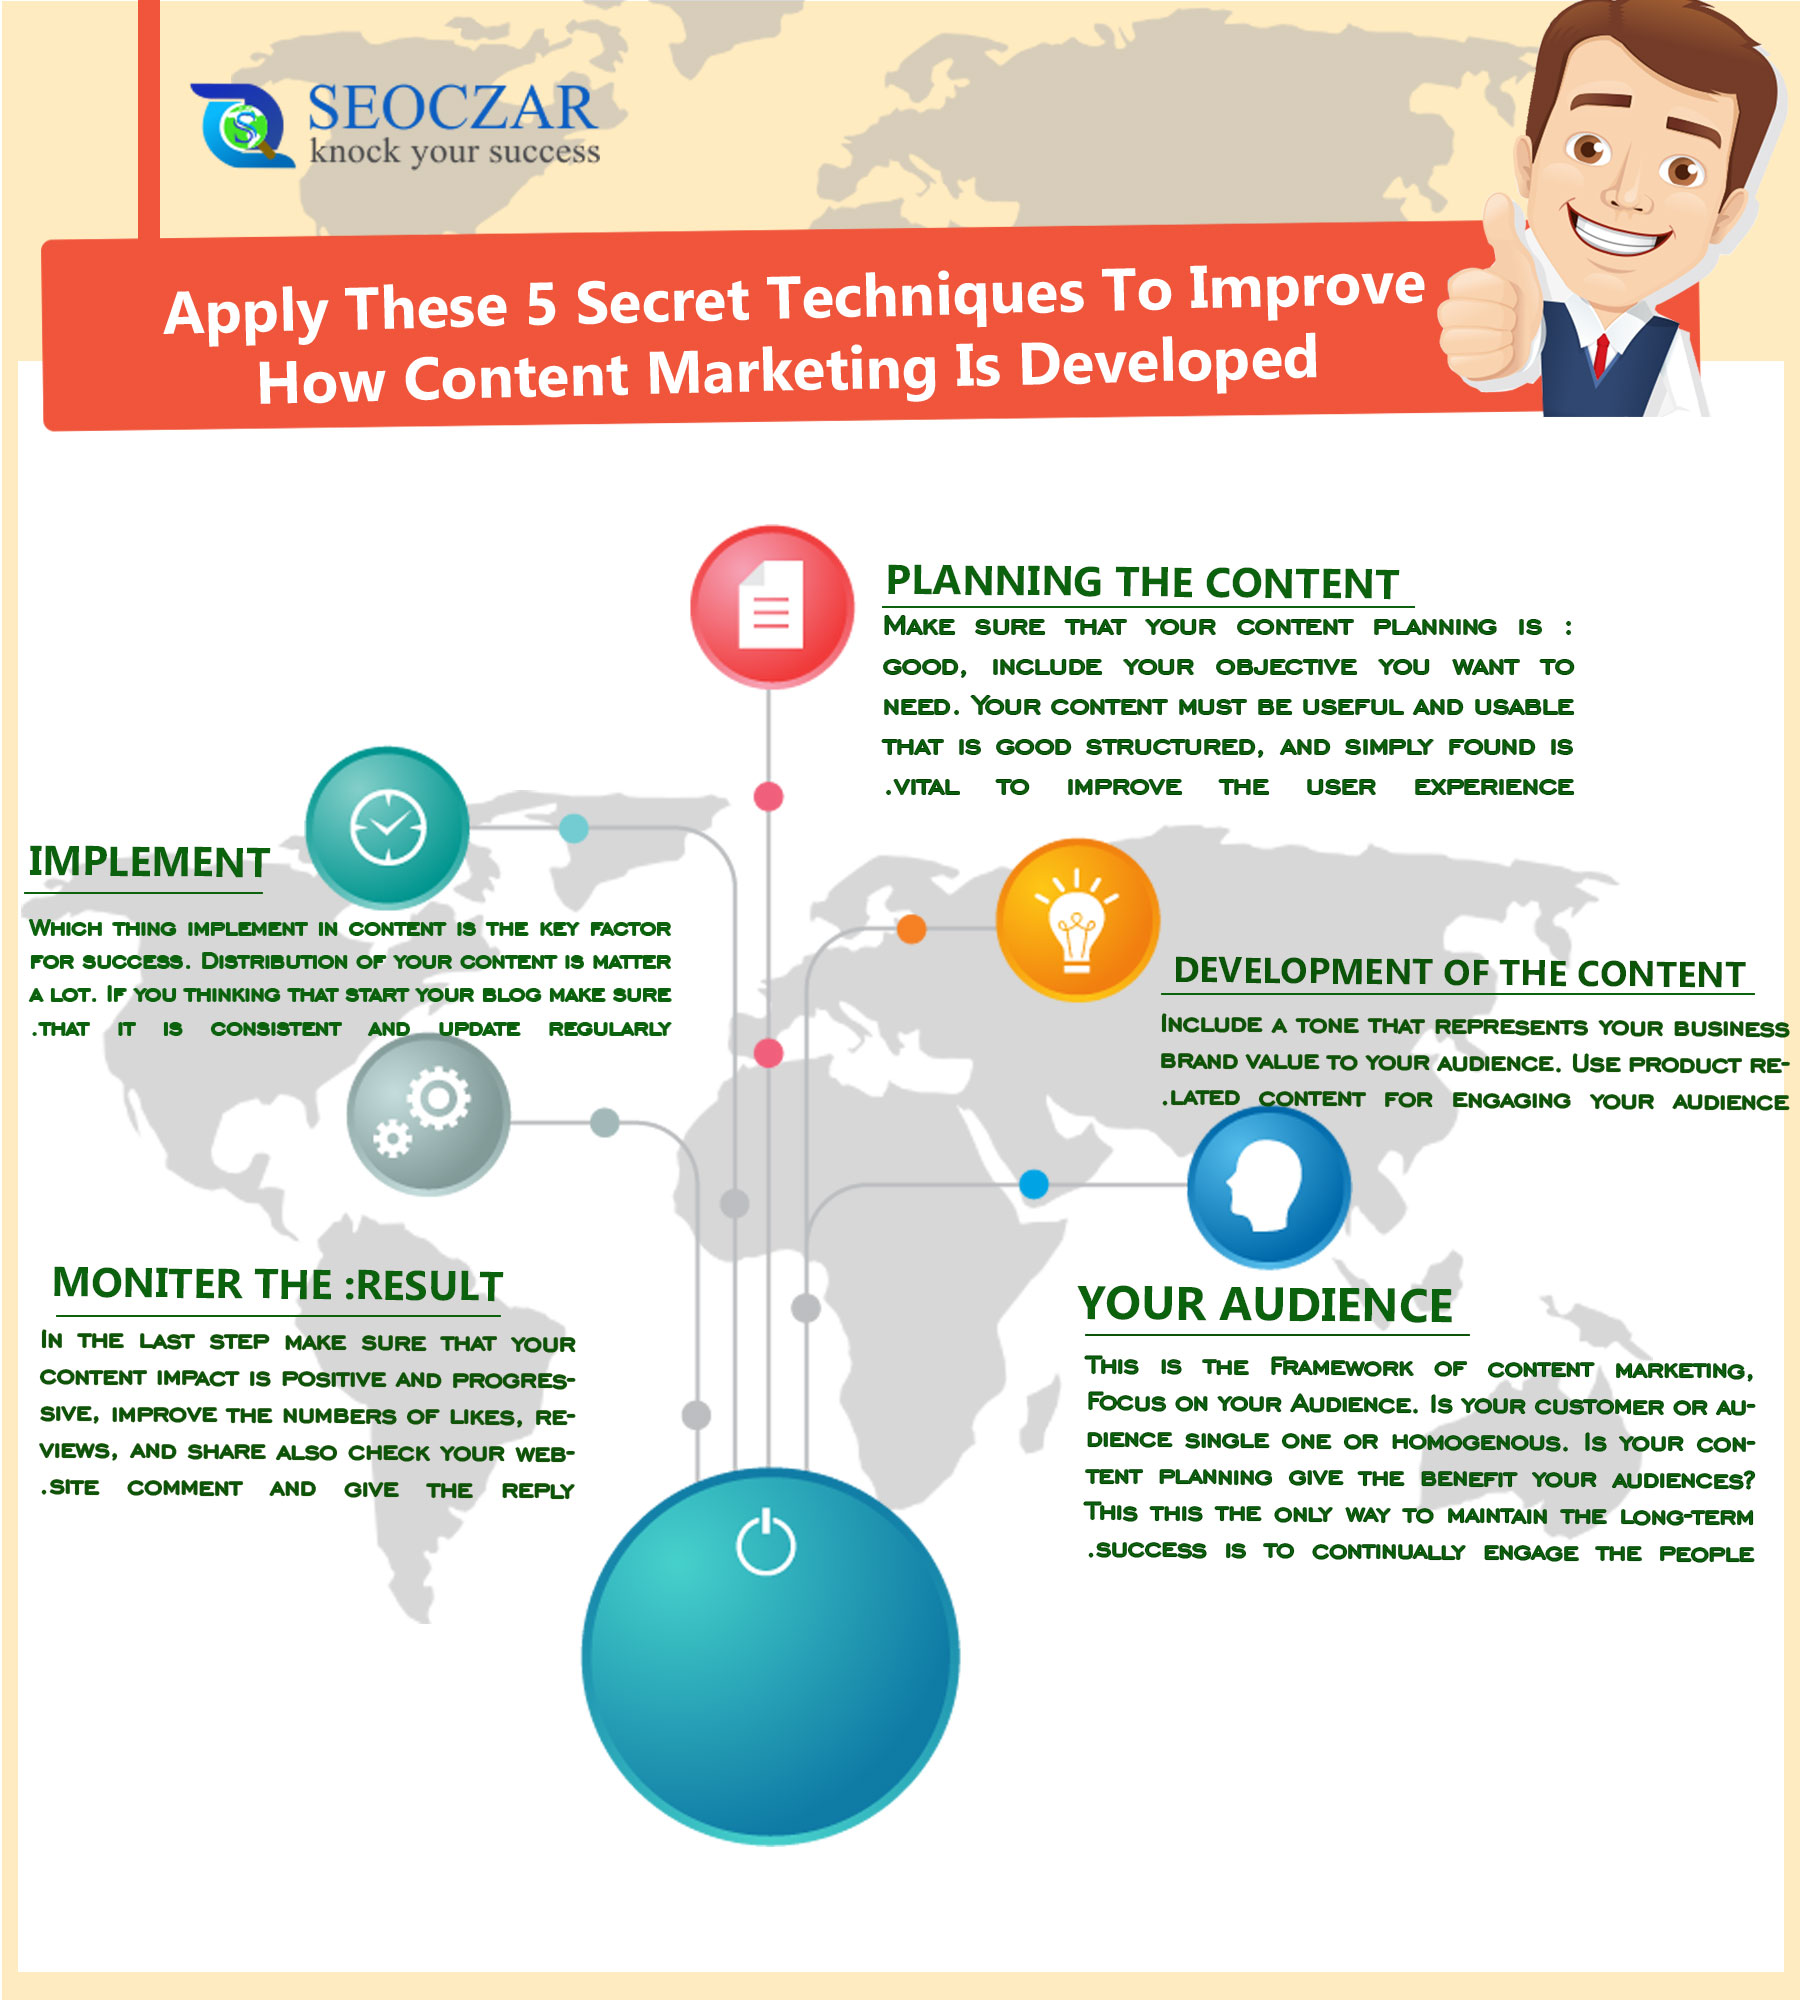 How Content Marketing Is Developed